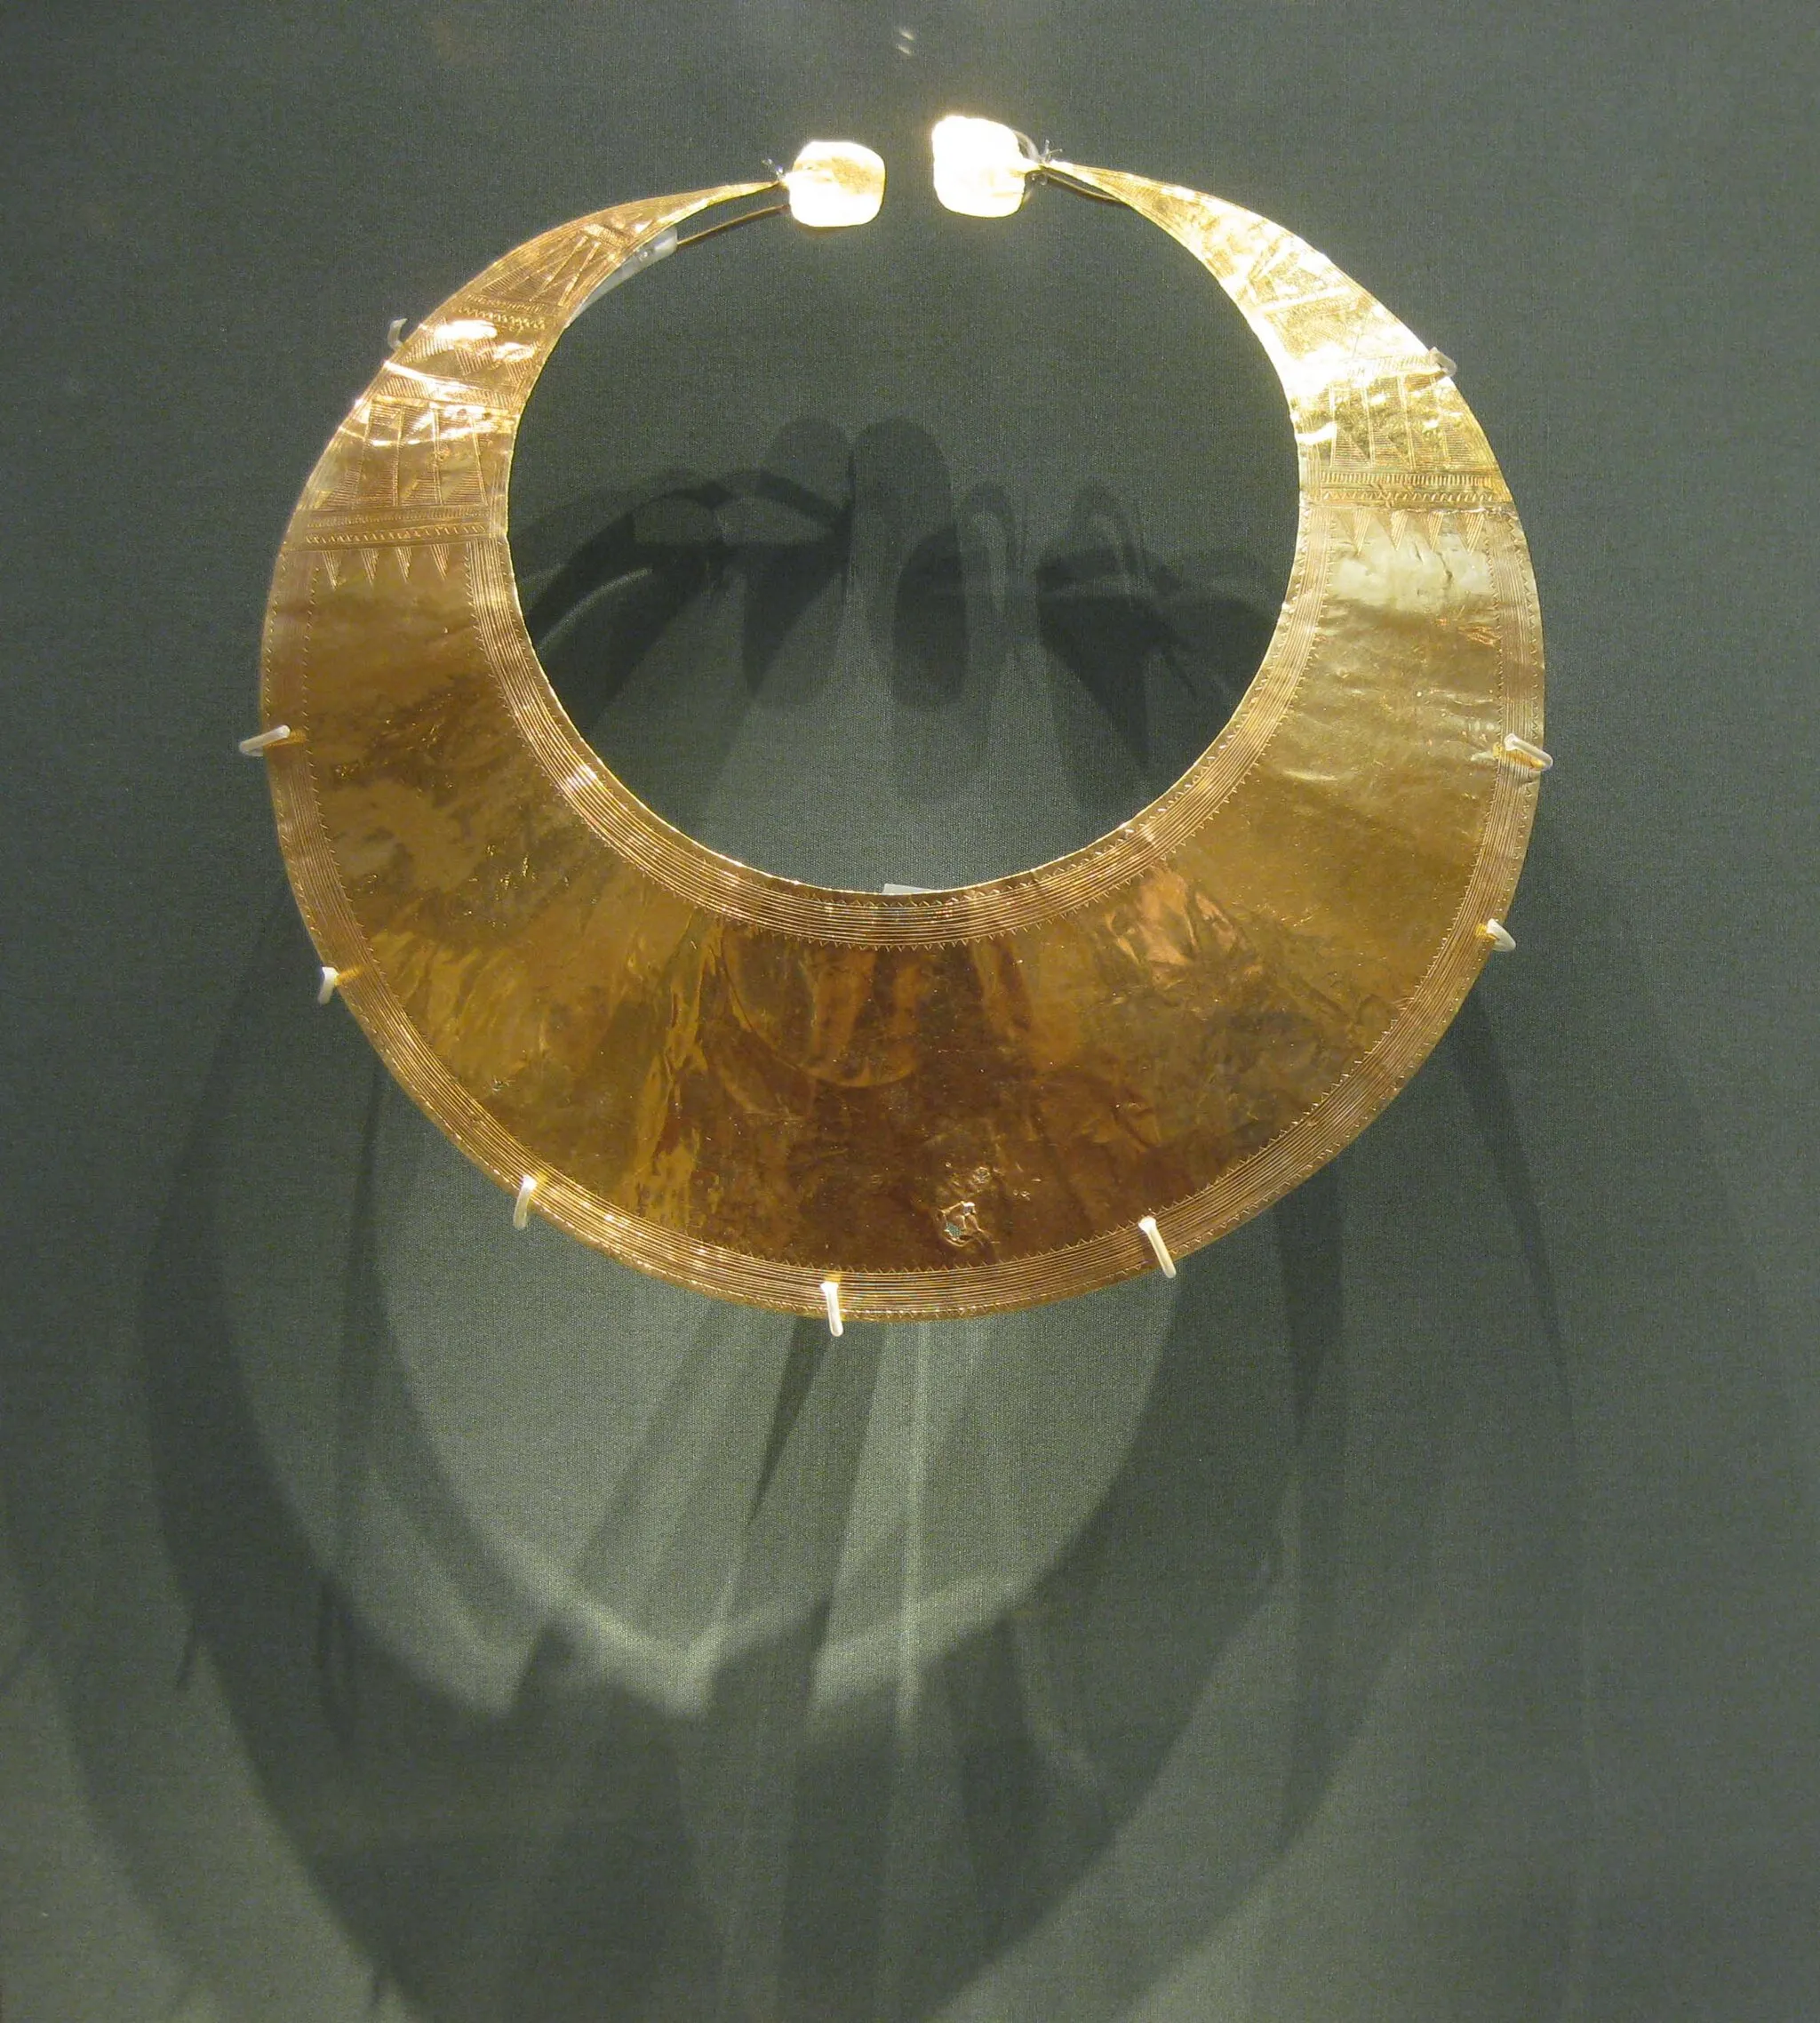 Photo showing: Photograph of a gold lunula found in Blessington, Co. Wicklow, Ireland and currently in the collection of the British Museum (Catalogue reference WG.31). The lunula is estimated to date from 2400 BCE to 2000 BCE (Copper Age/Bronze Age)